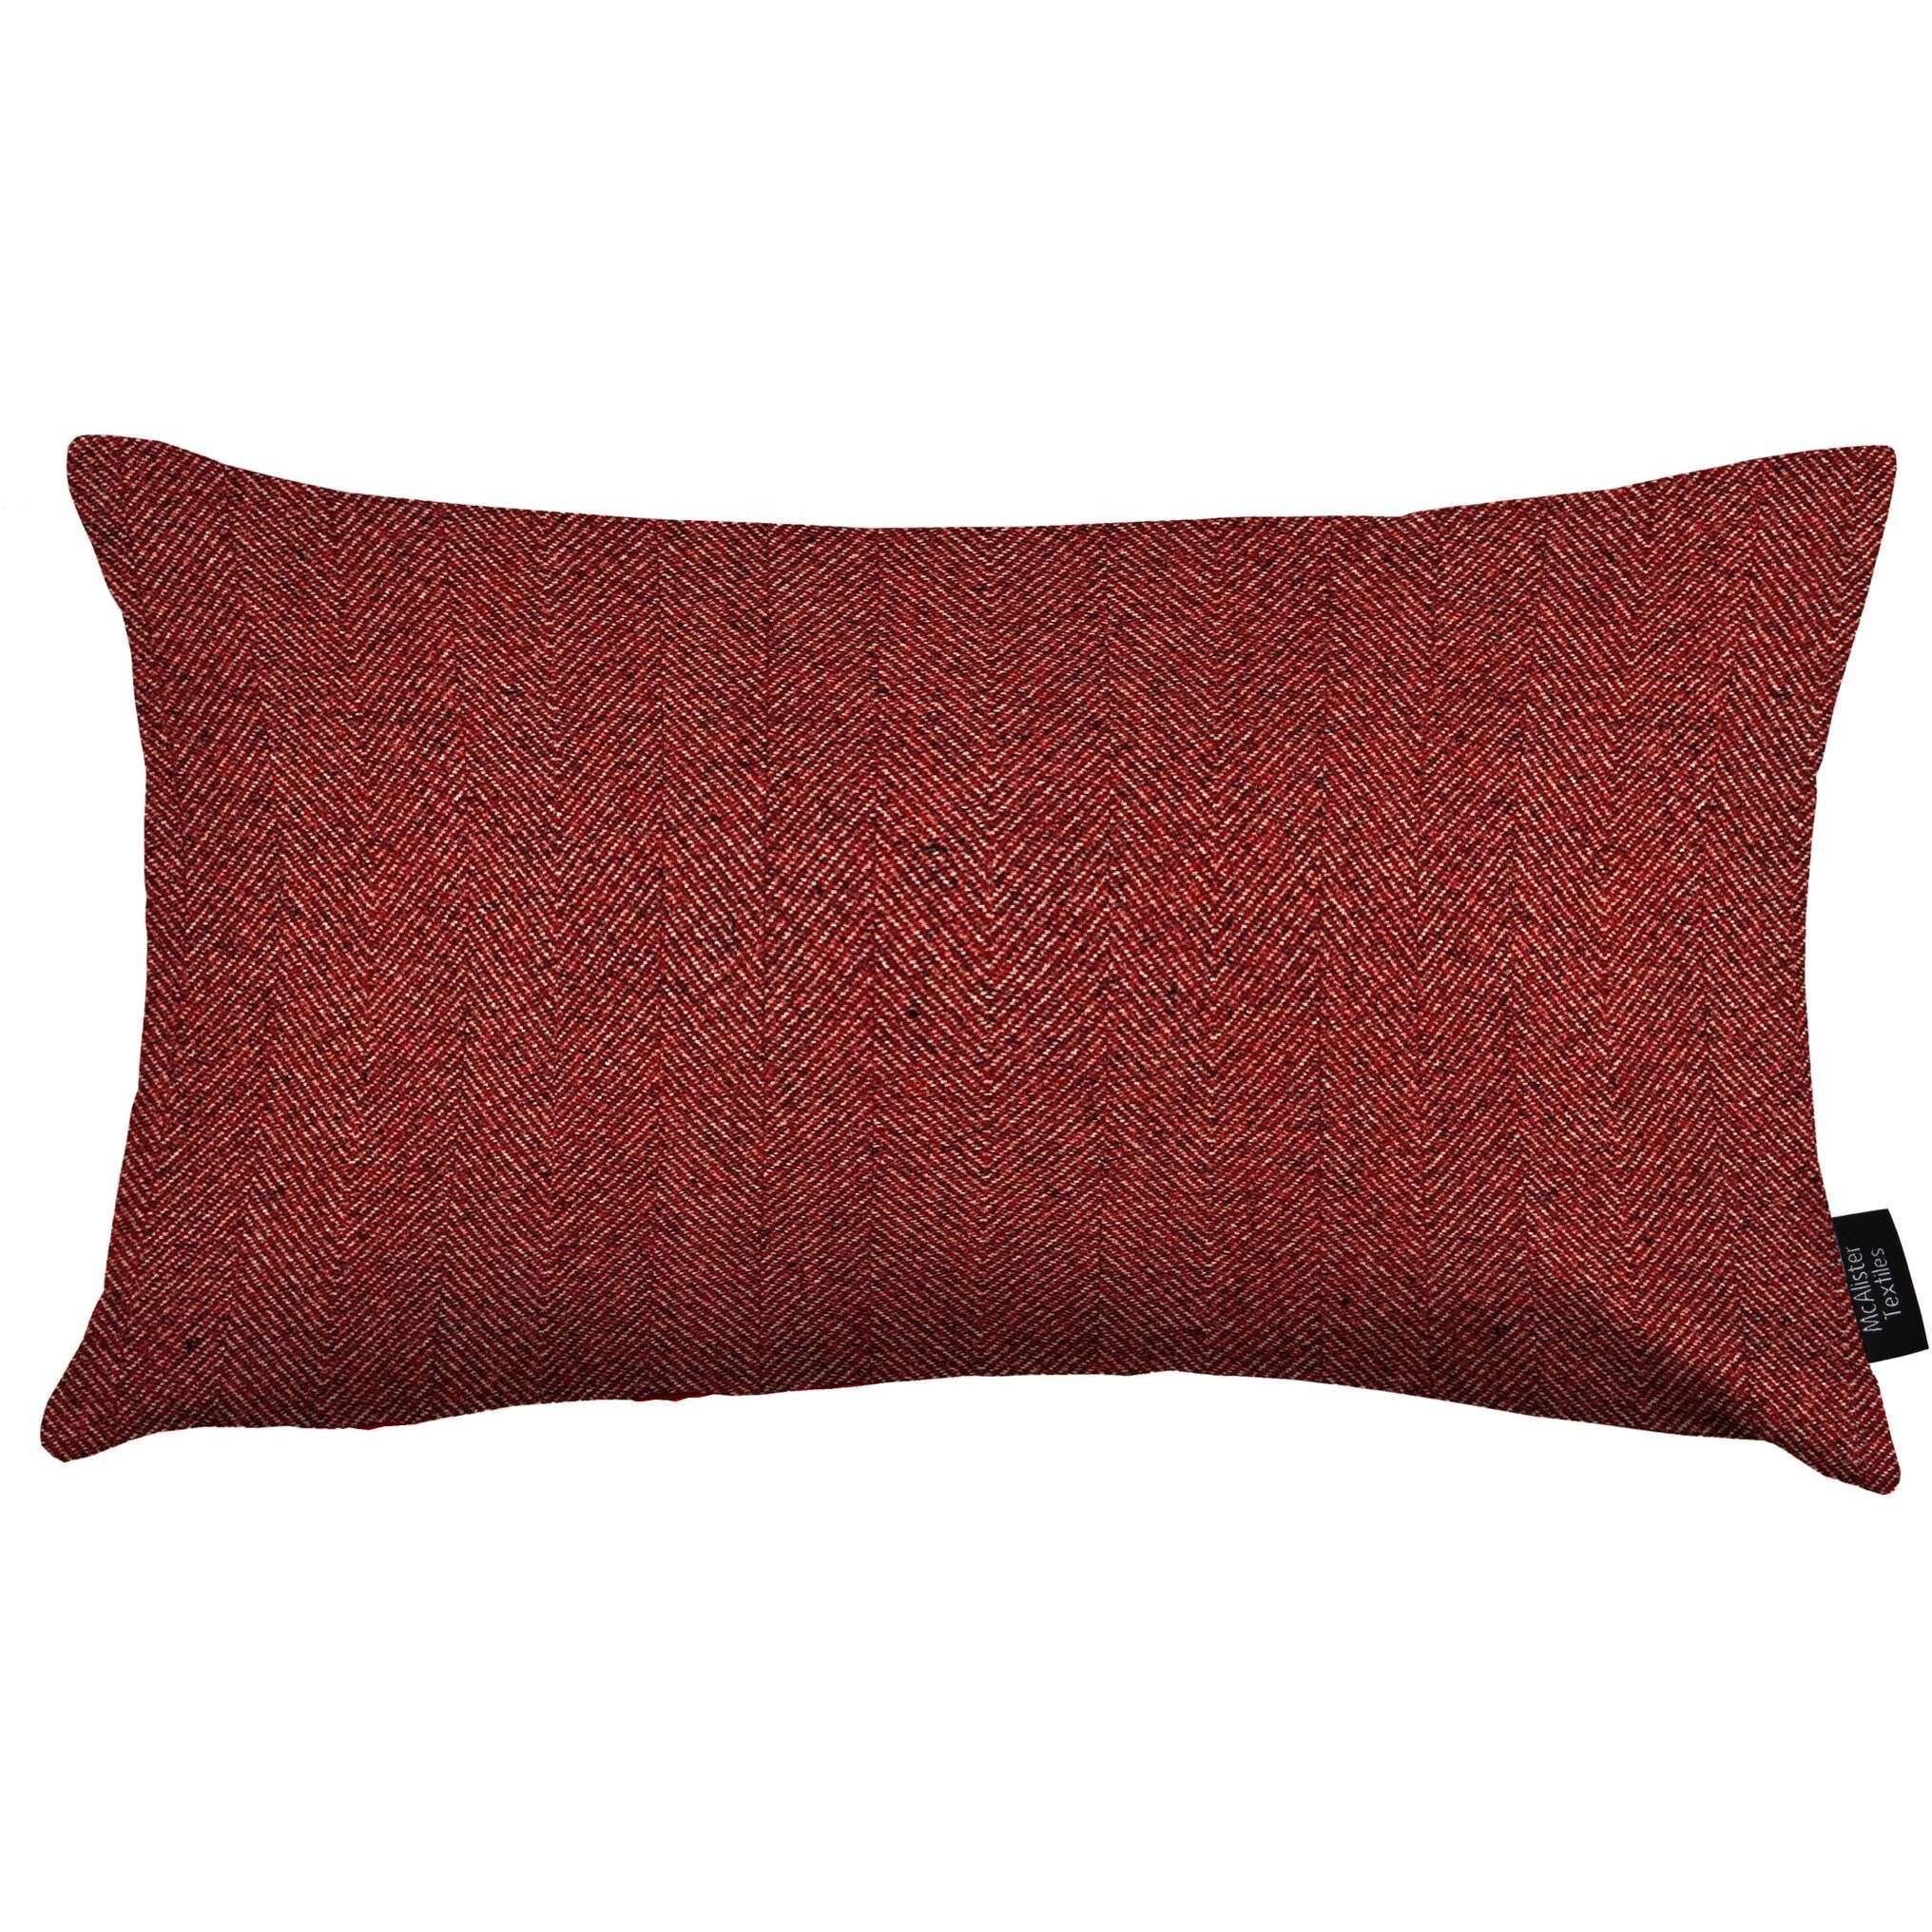 McAlister Textiles Herringbone Red Pillow Pillow Cover Only 50cm x 30cm 